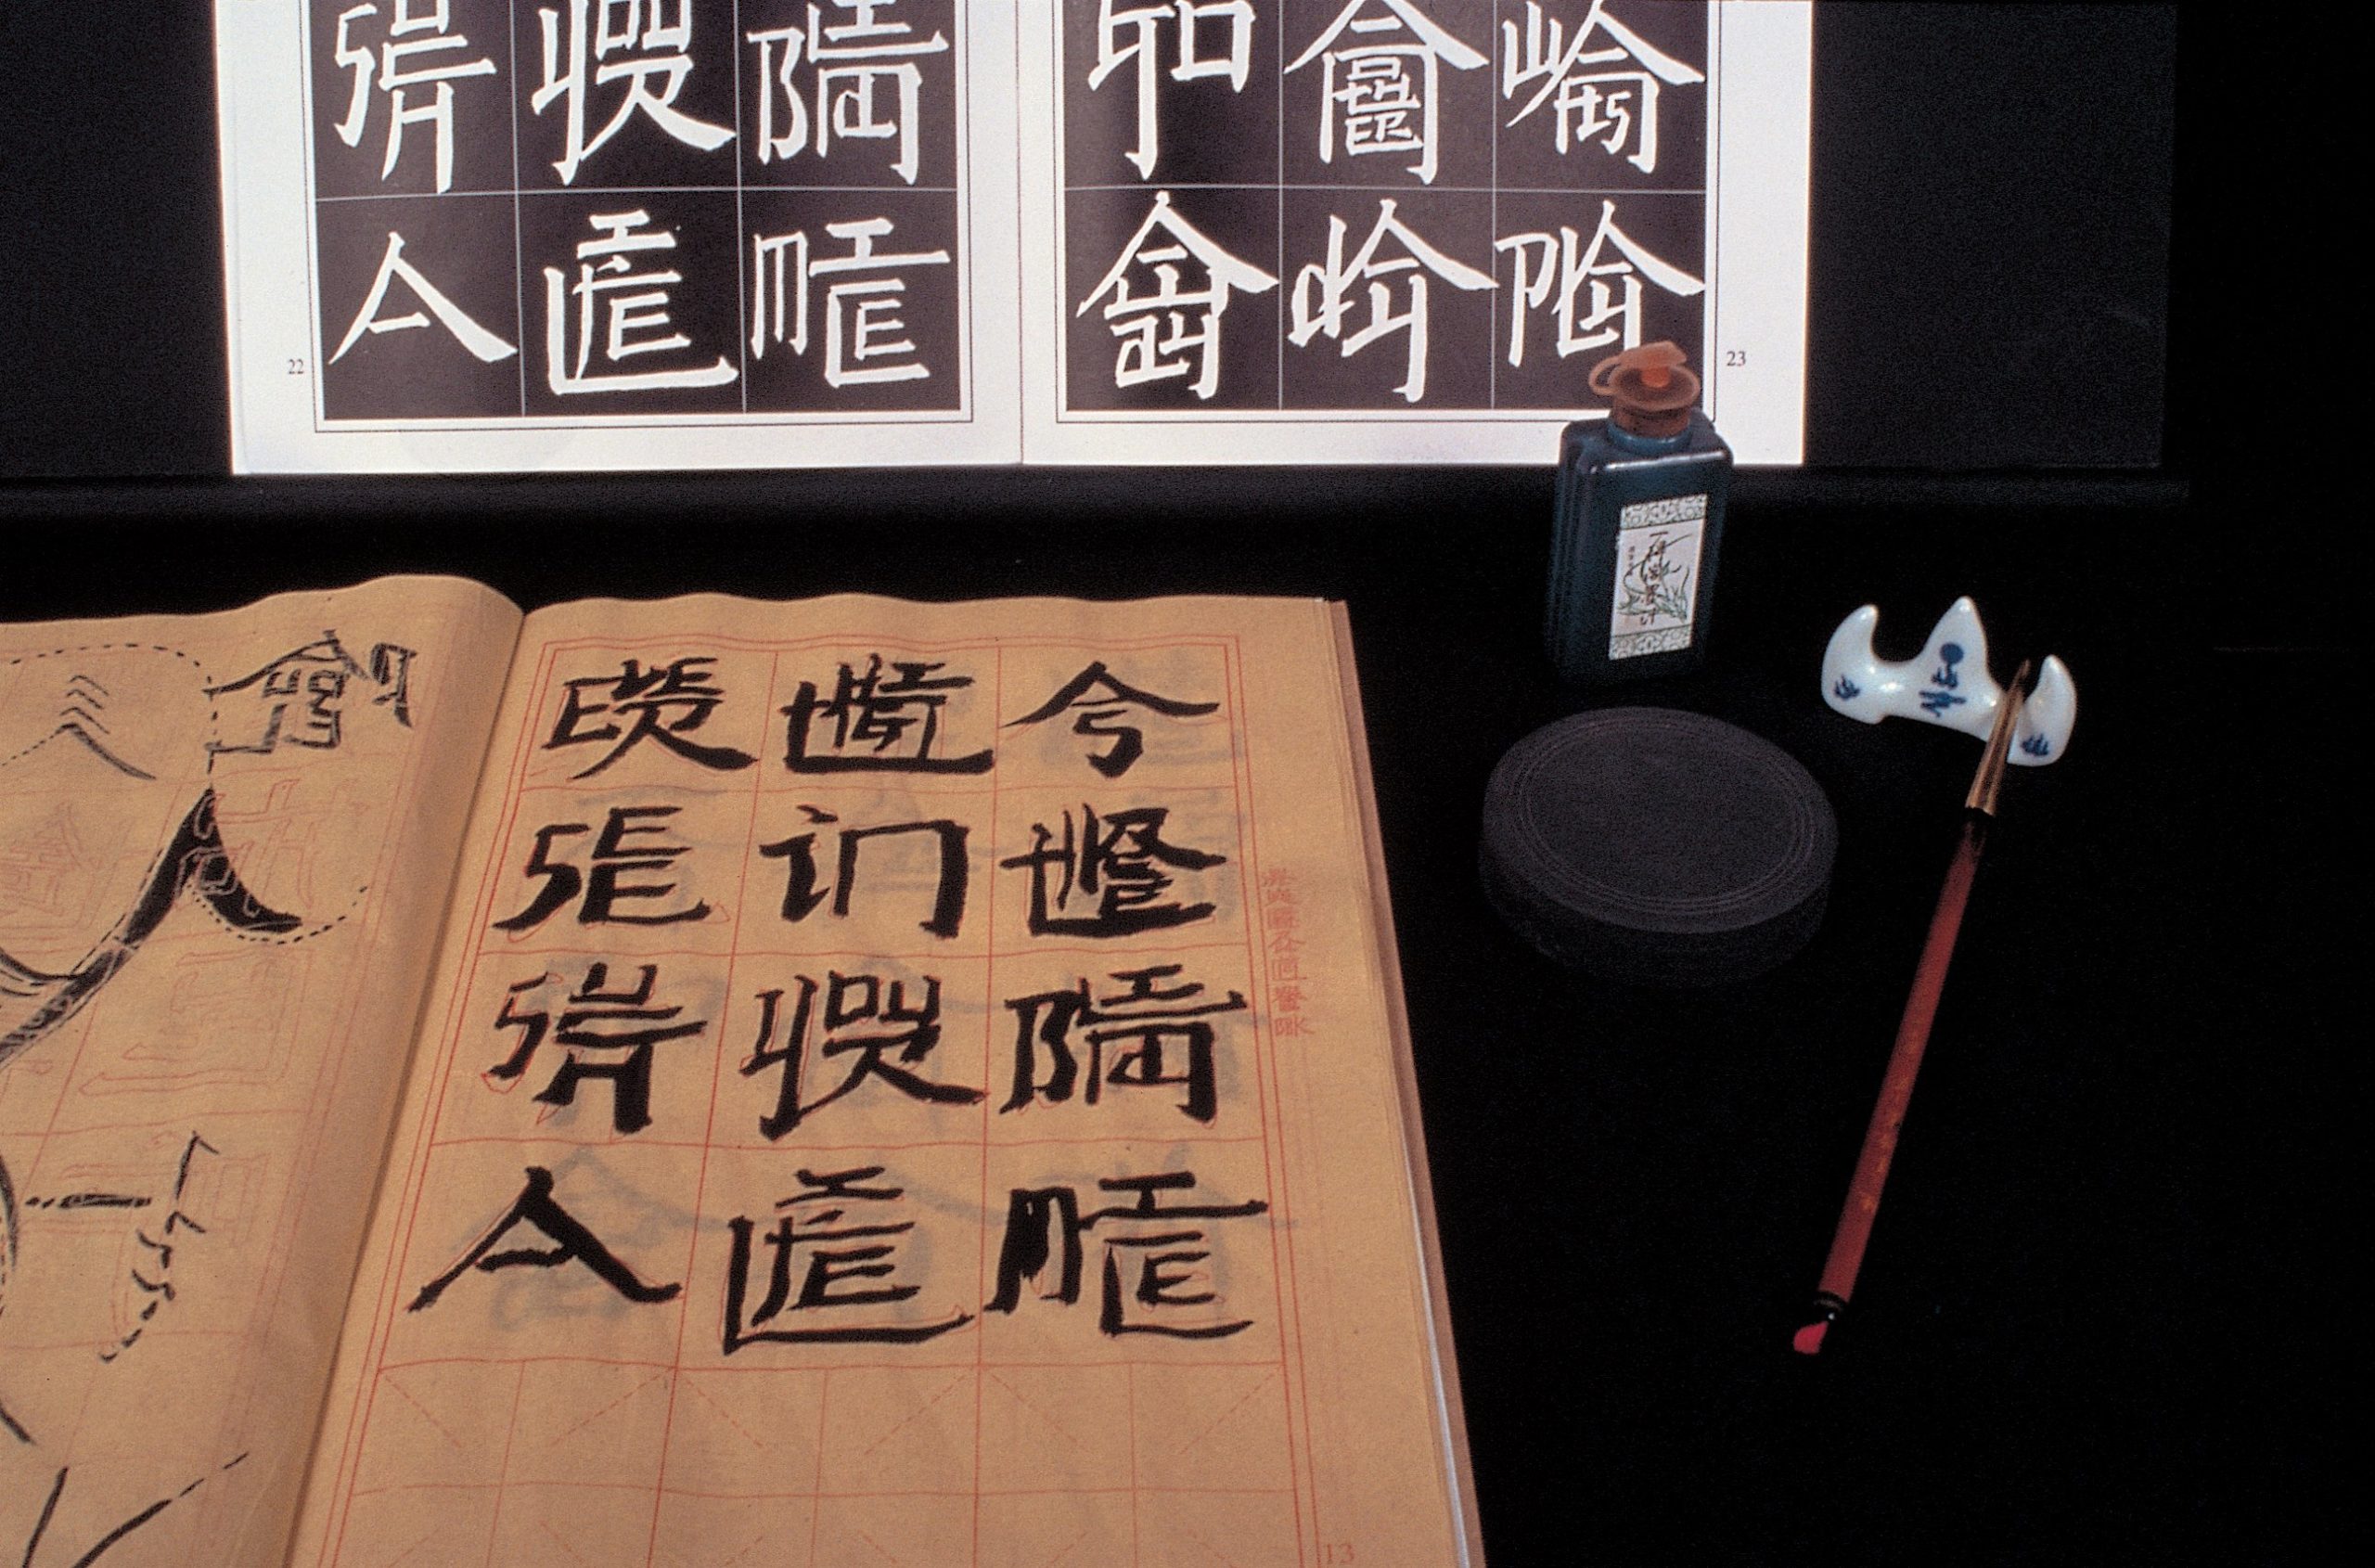 Square Words - New English Calligraphy